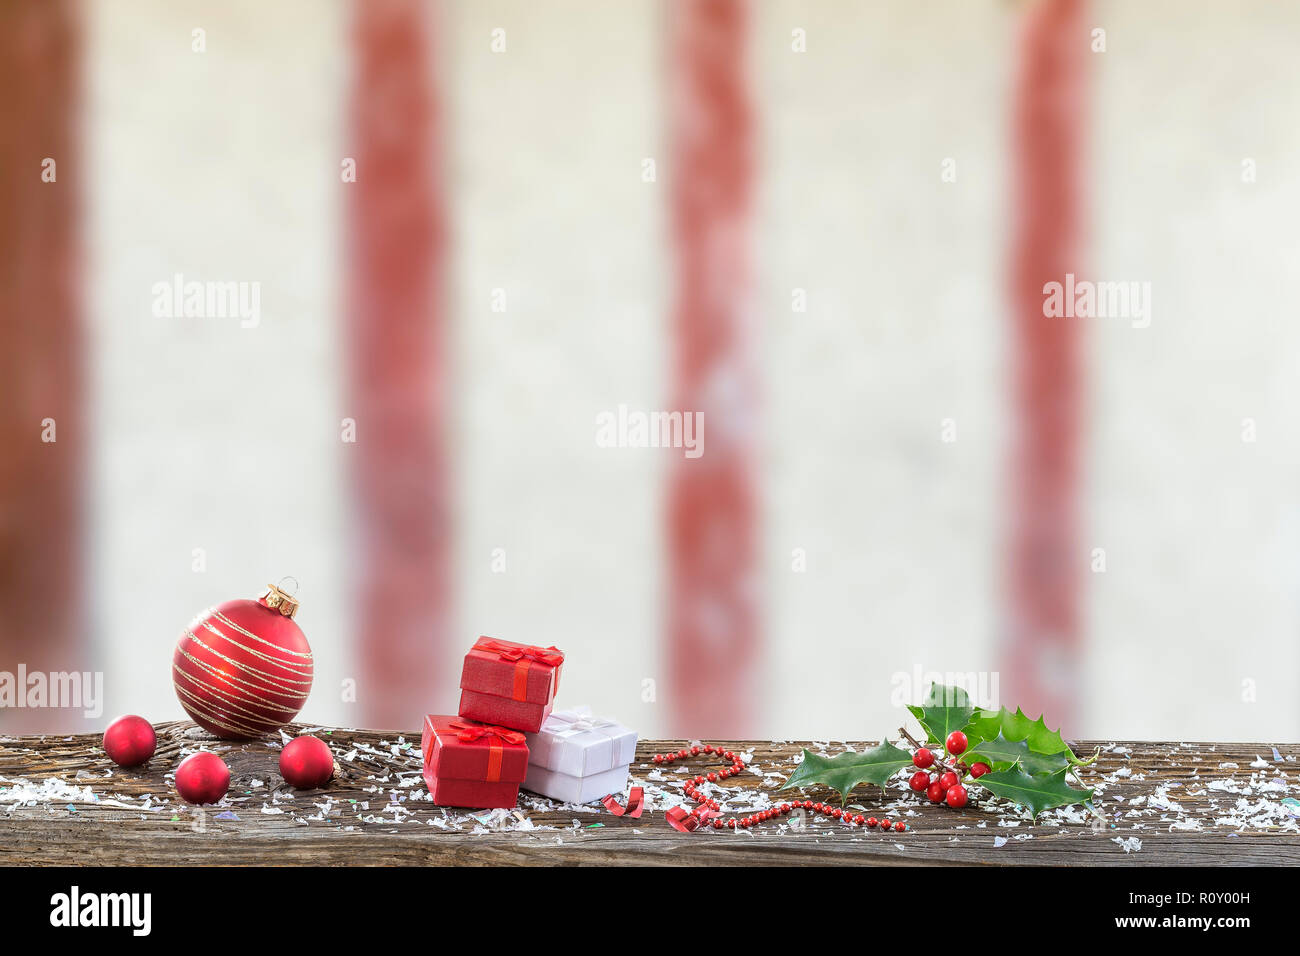 Christmas background with decorations Christmas' balls and gift boxes red on wooden board against timbered wall Stock Photo